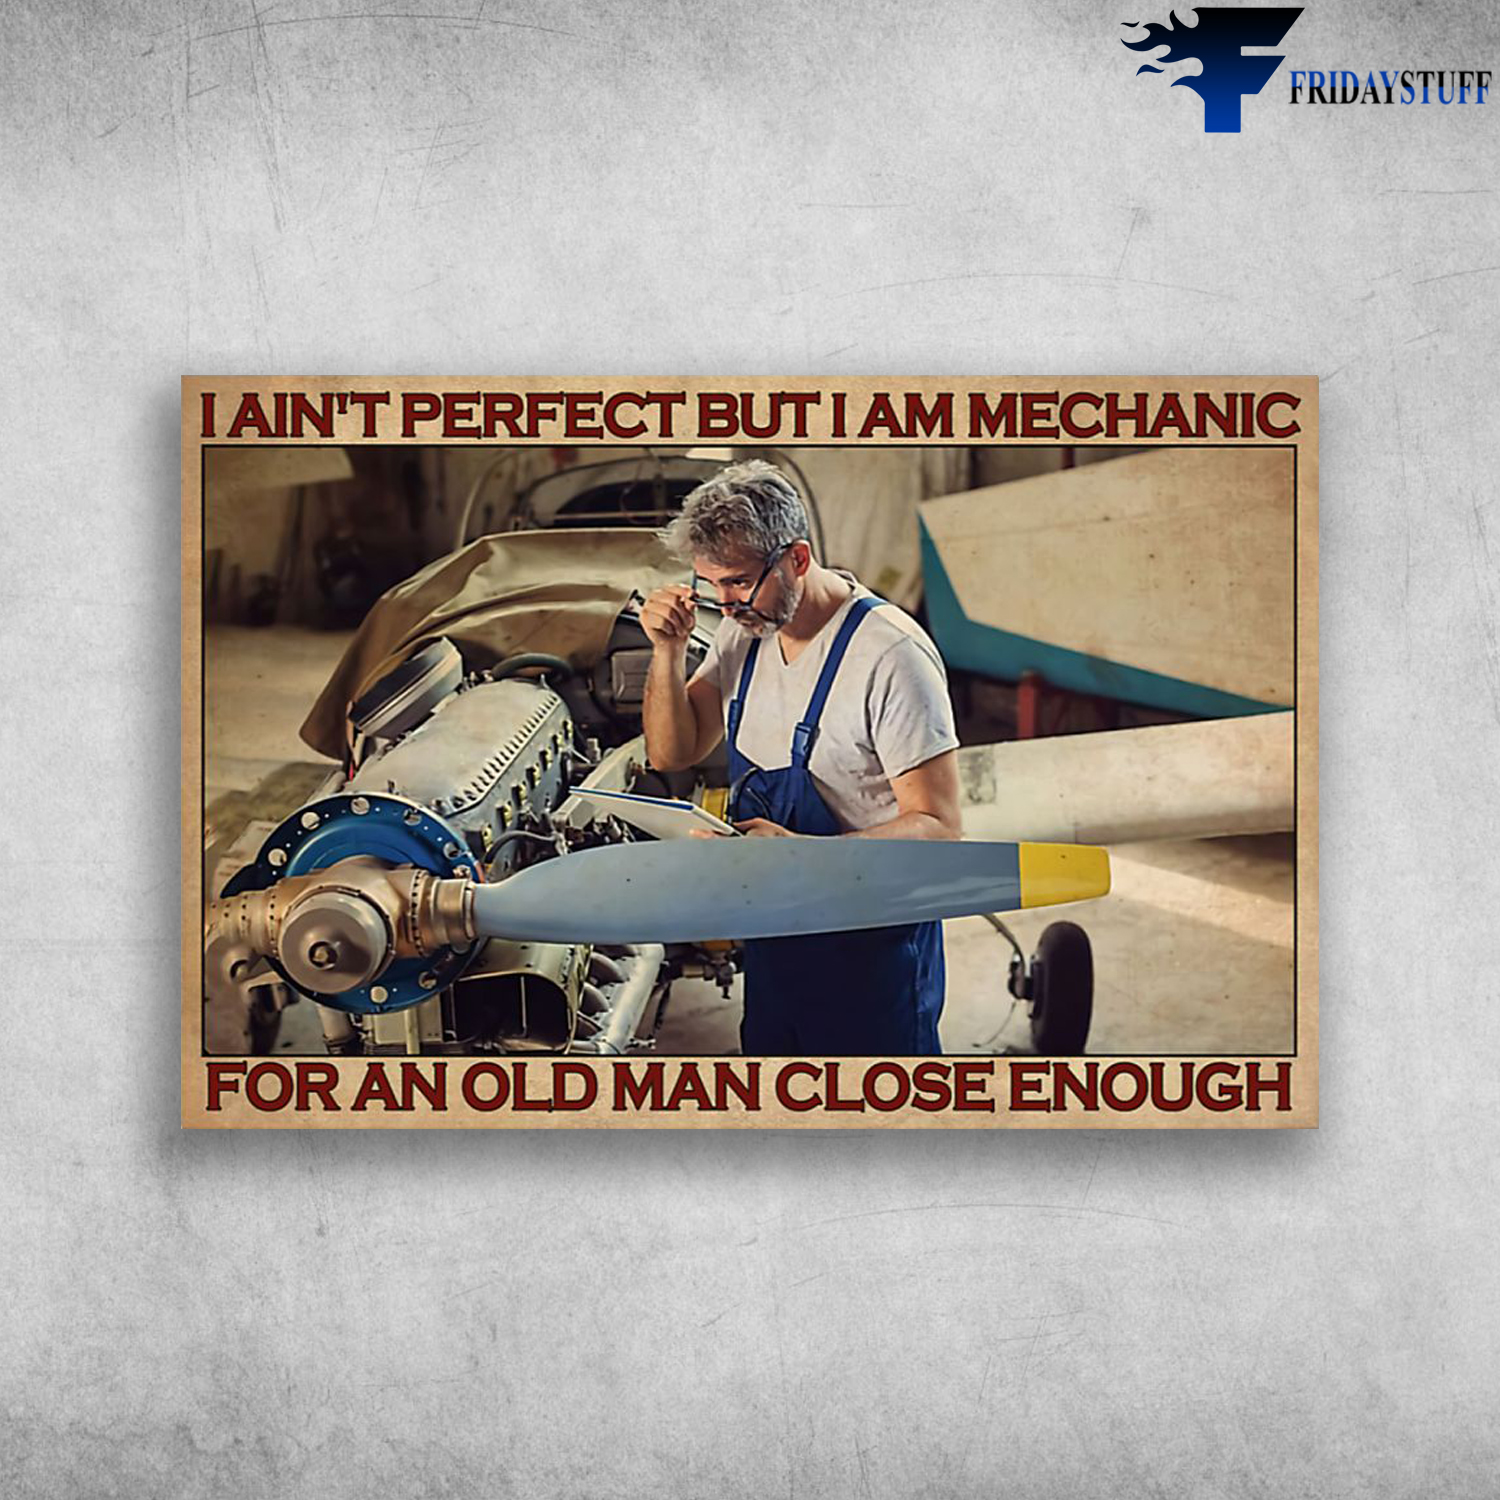 The Old Mechanic - I Ain't Perfect But I Am Mechanic, For An Old Man Close Enough